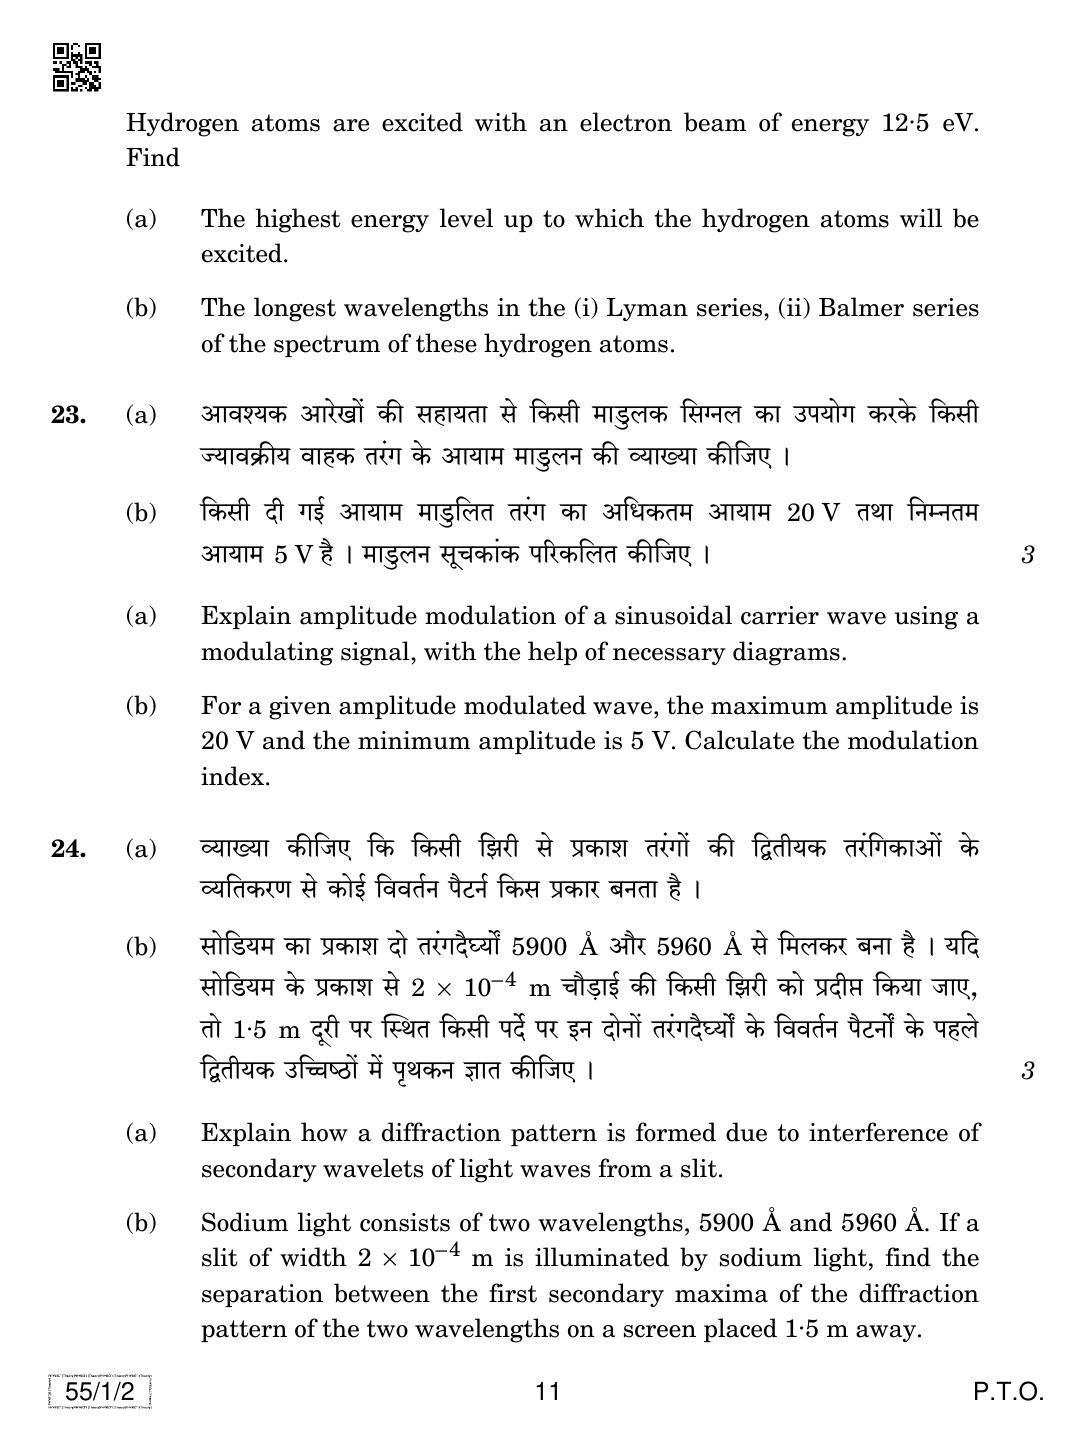 CBSE Class 12 55-1-2 PHYSICS 2019 Compartment Question Paper - Page 11